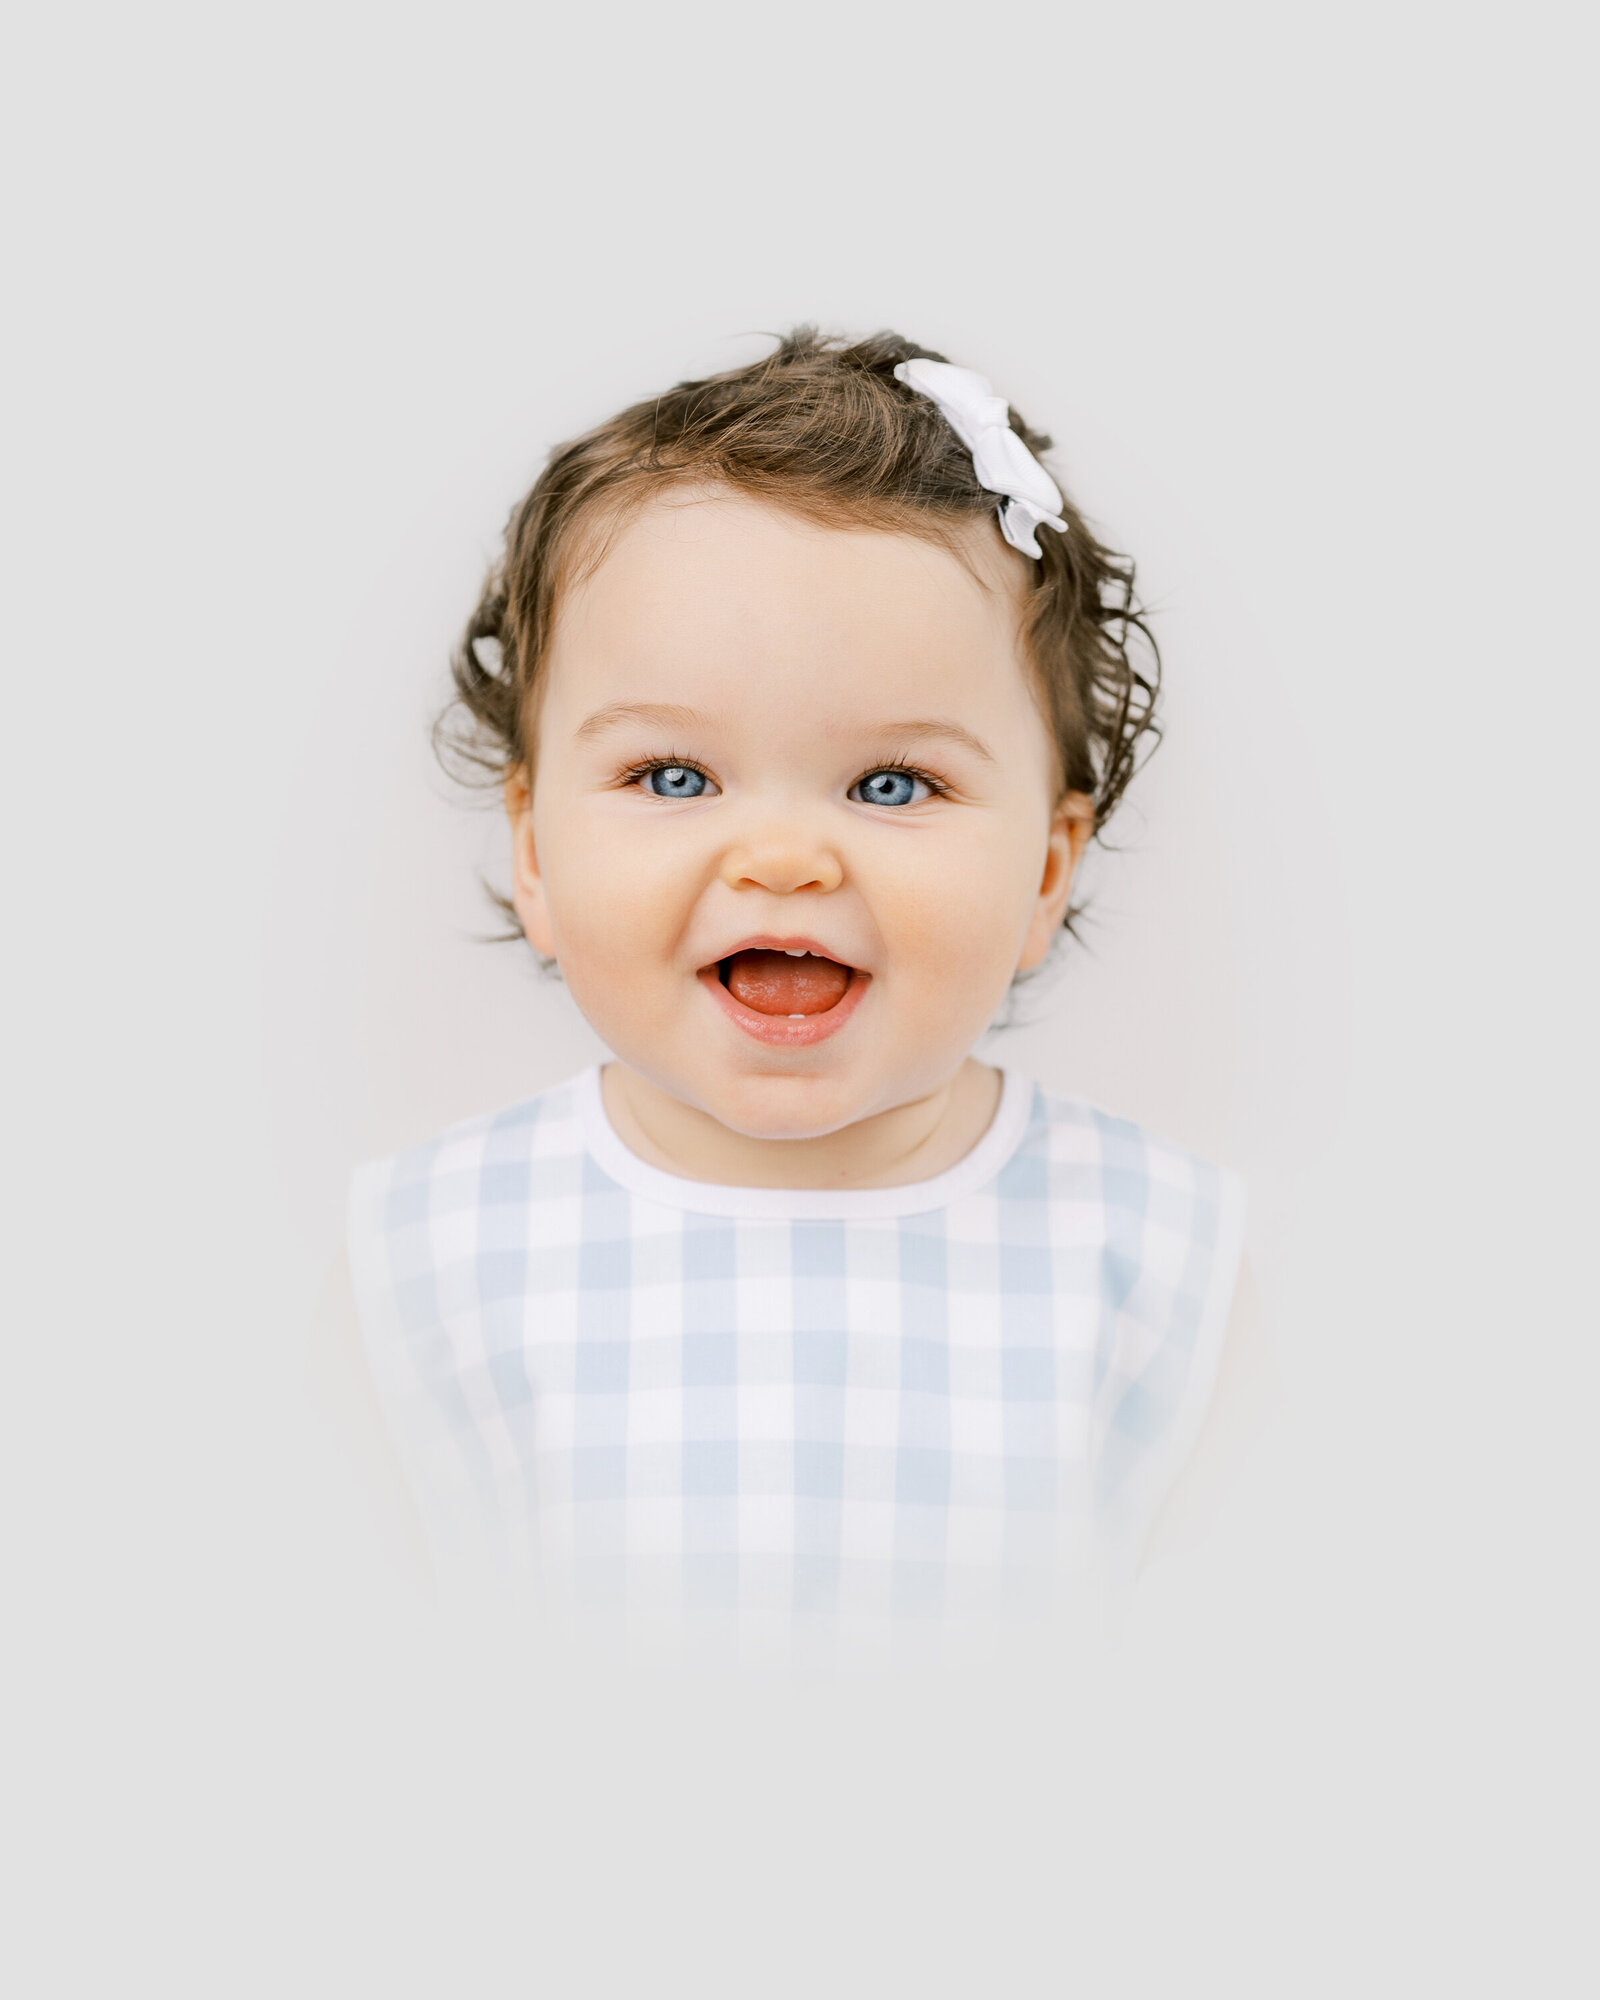 Color heirloom portrait of baby girl smiling with dark curly hair and bright blue eyes by Worth Capturing